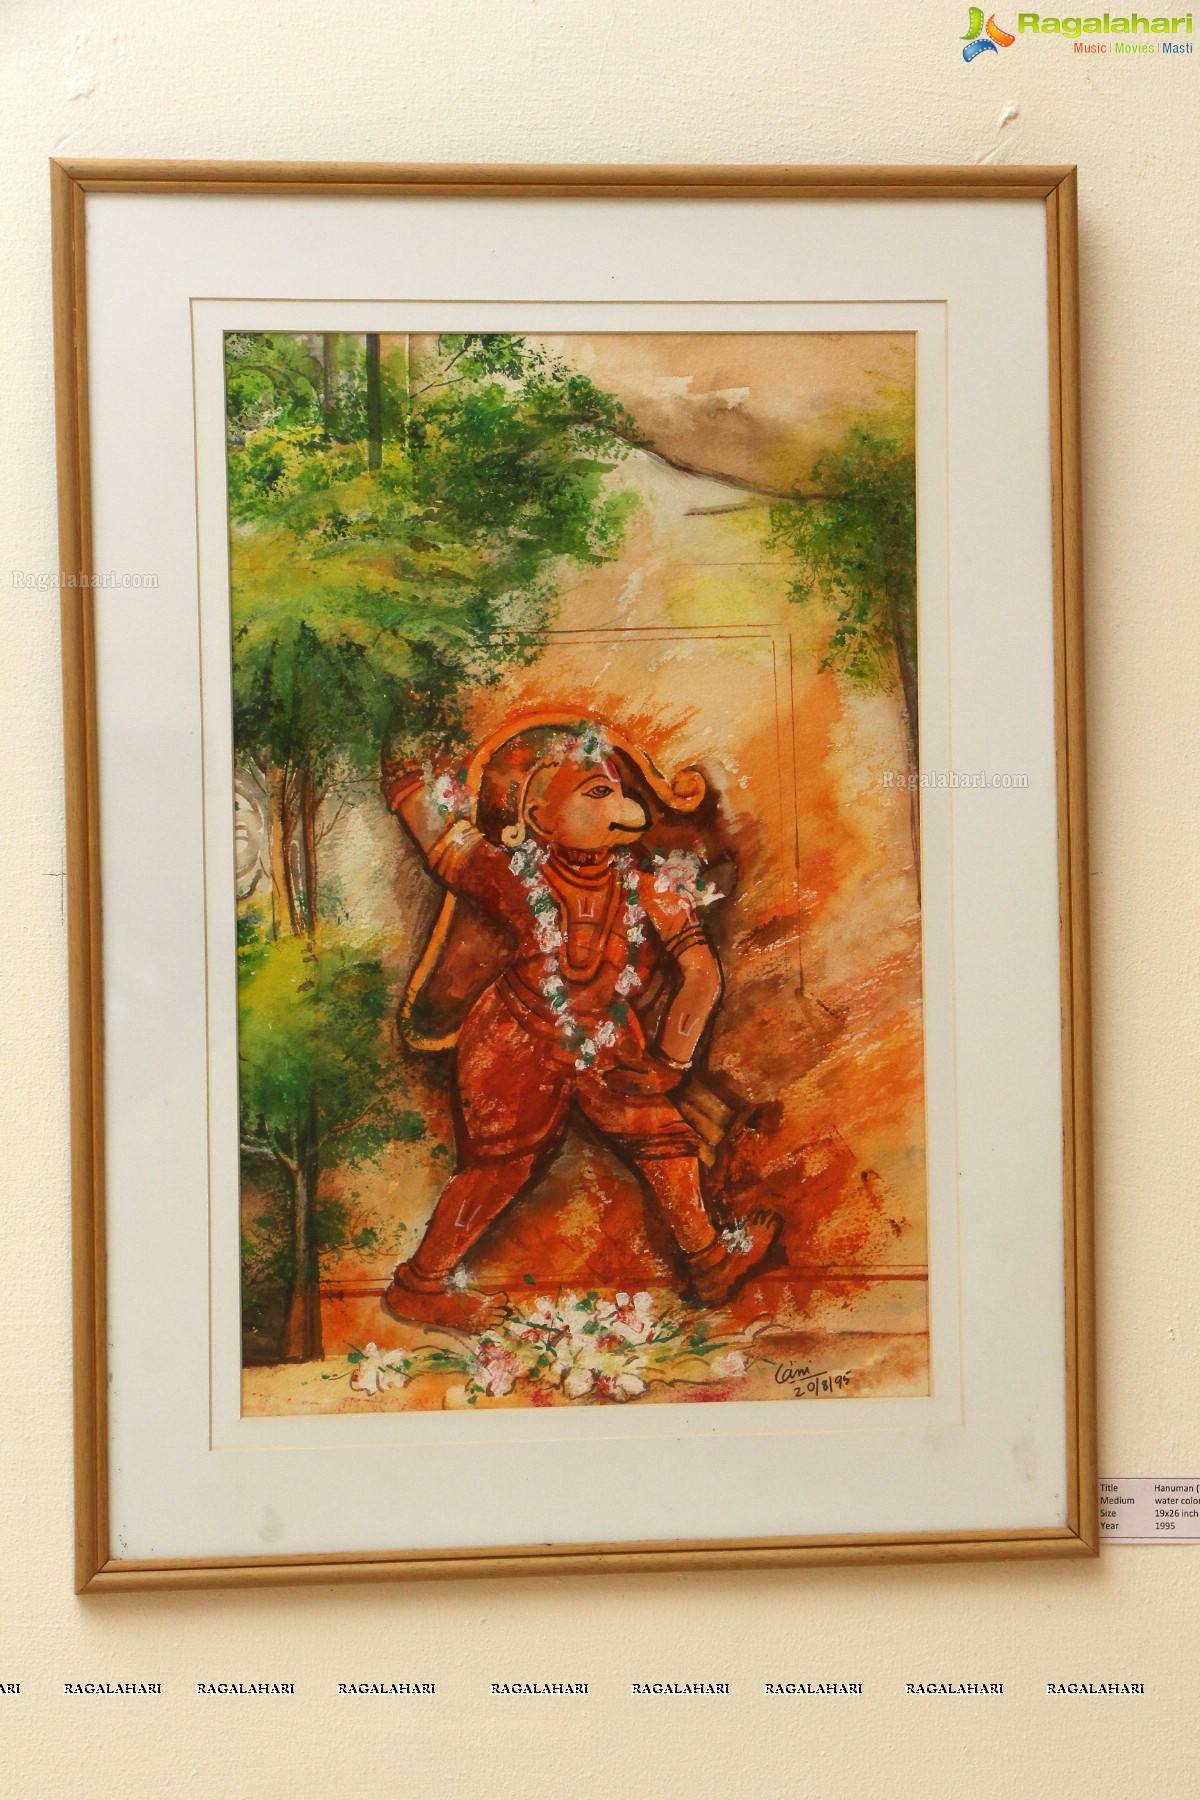 A Special Exhibition of Painting by Smt. S. Vani Devi at Salar Jung Museum, Hyderabad